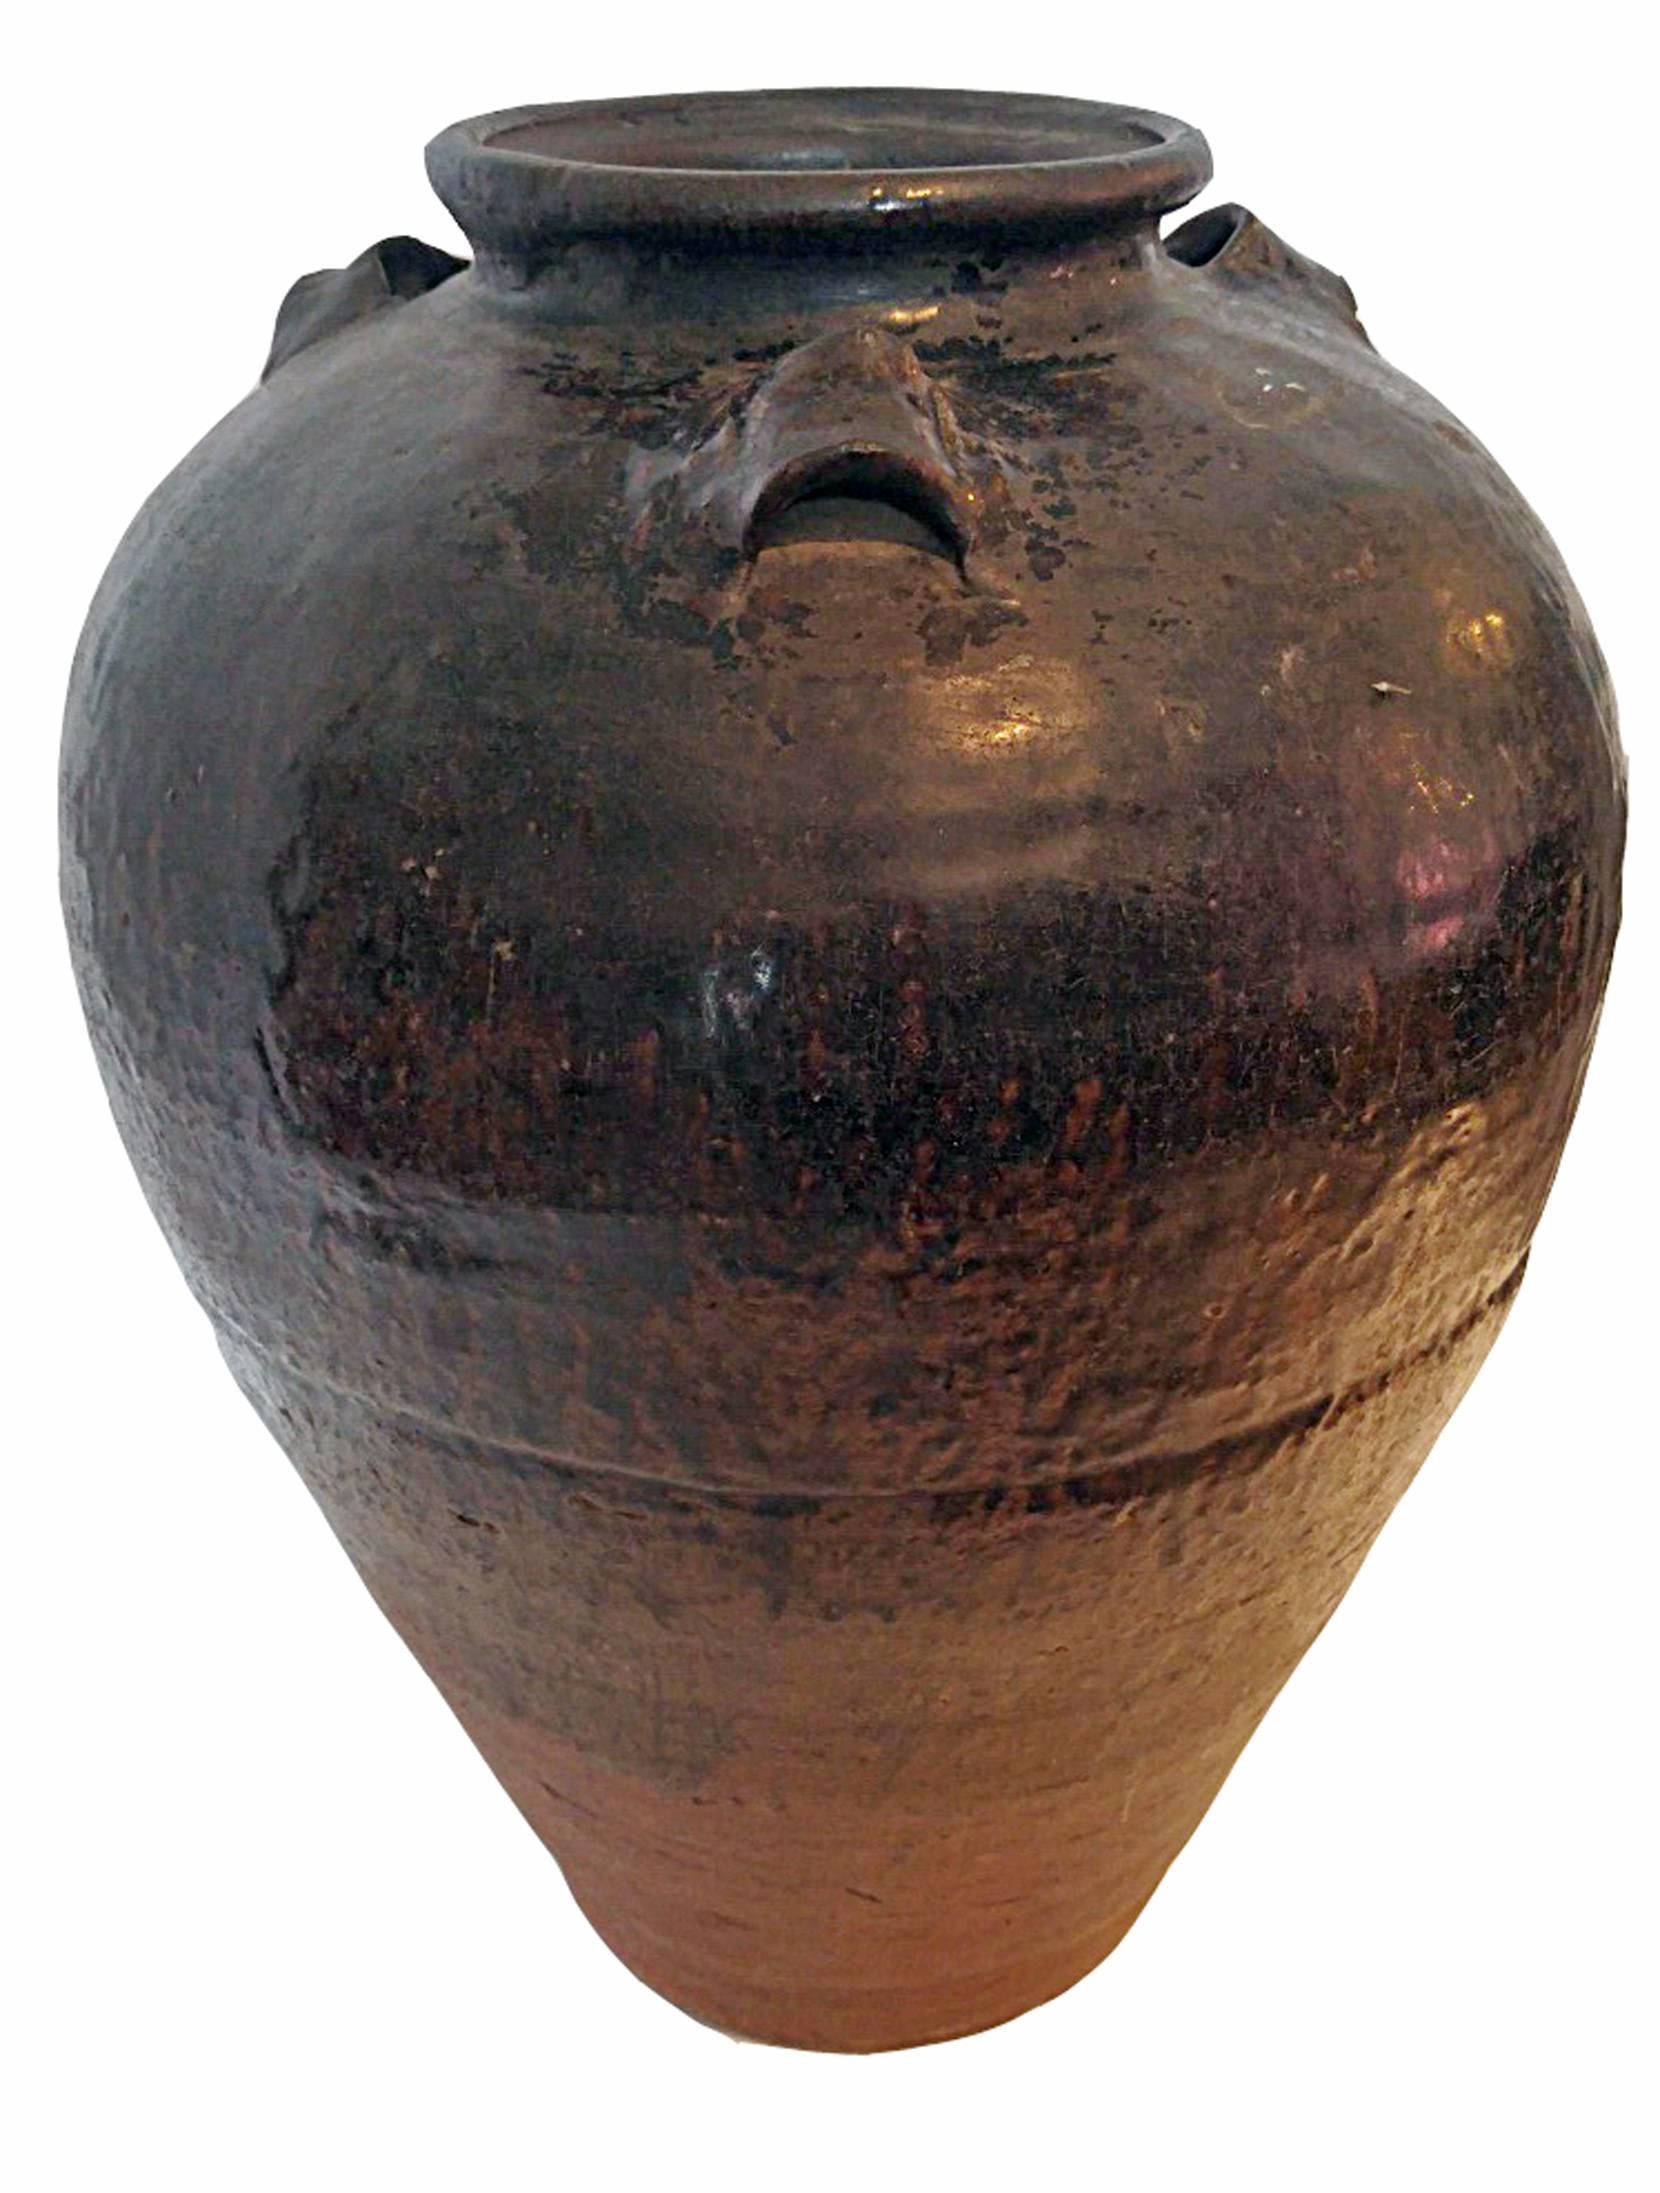 A large clay pot, vase or urn with ears and a dark glaze, from India.